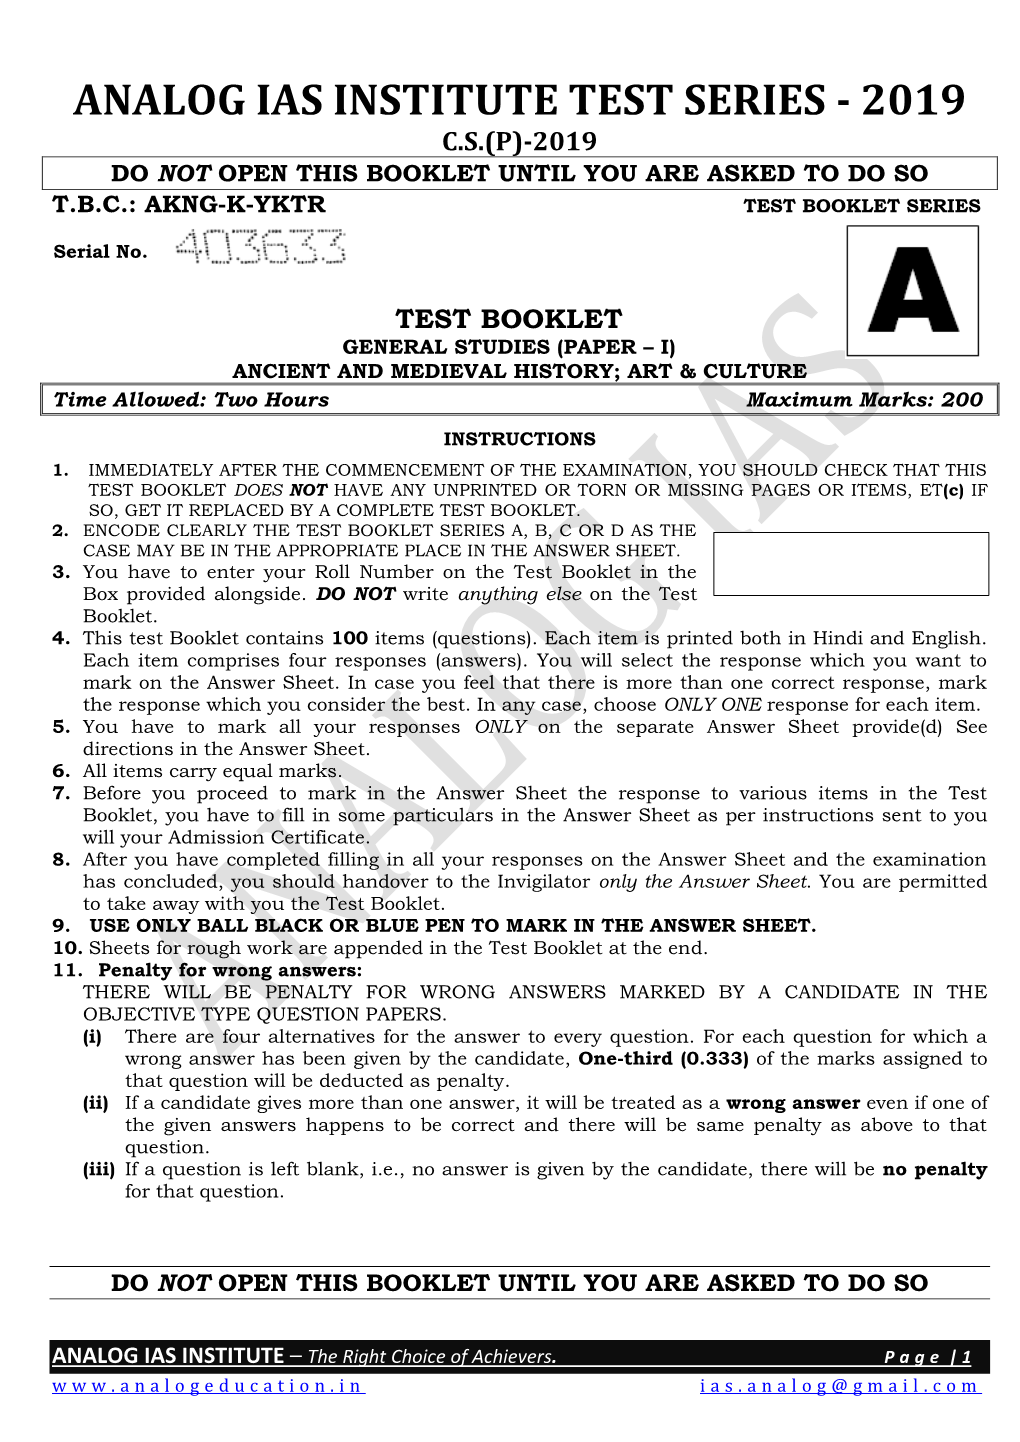 Analog Ias Institute Test Series - 2019 C.S.(P)-2019 Do Not Open This Booklet Until You Are Asked to Do So T.B.C.: Akng-K-Yktr Test Booklet Series